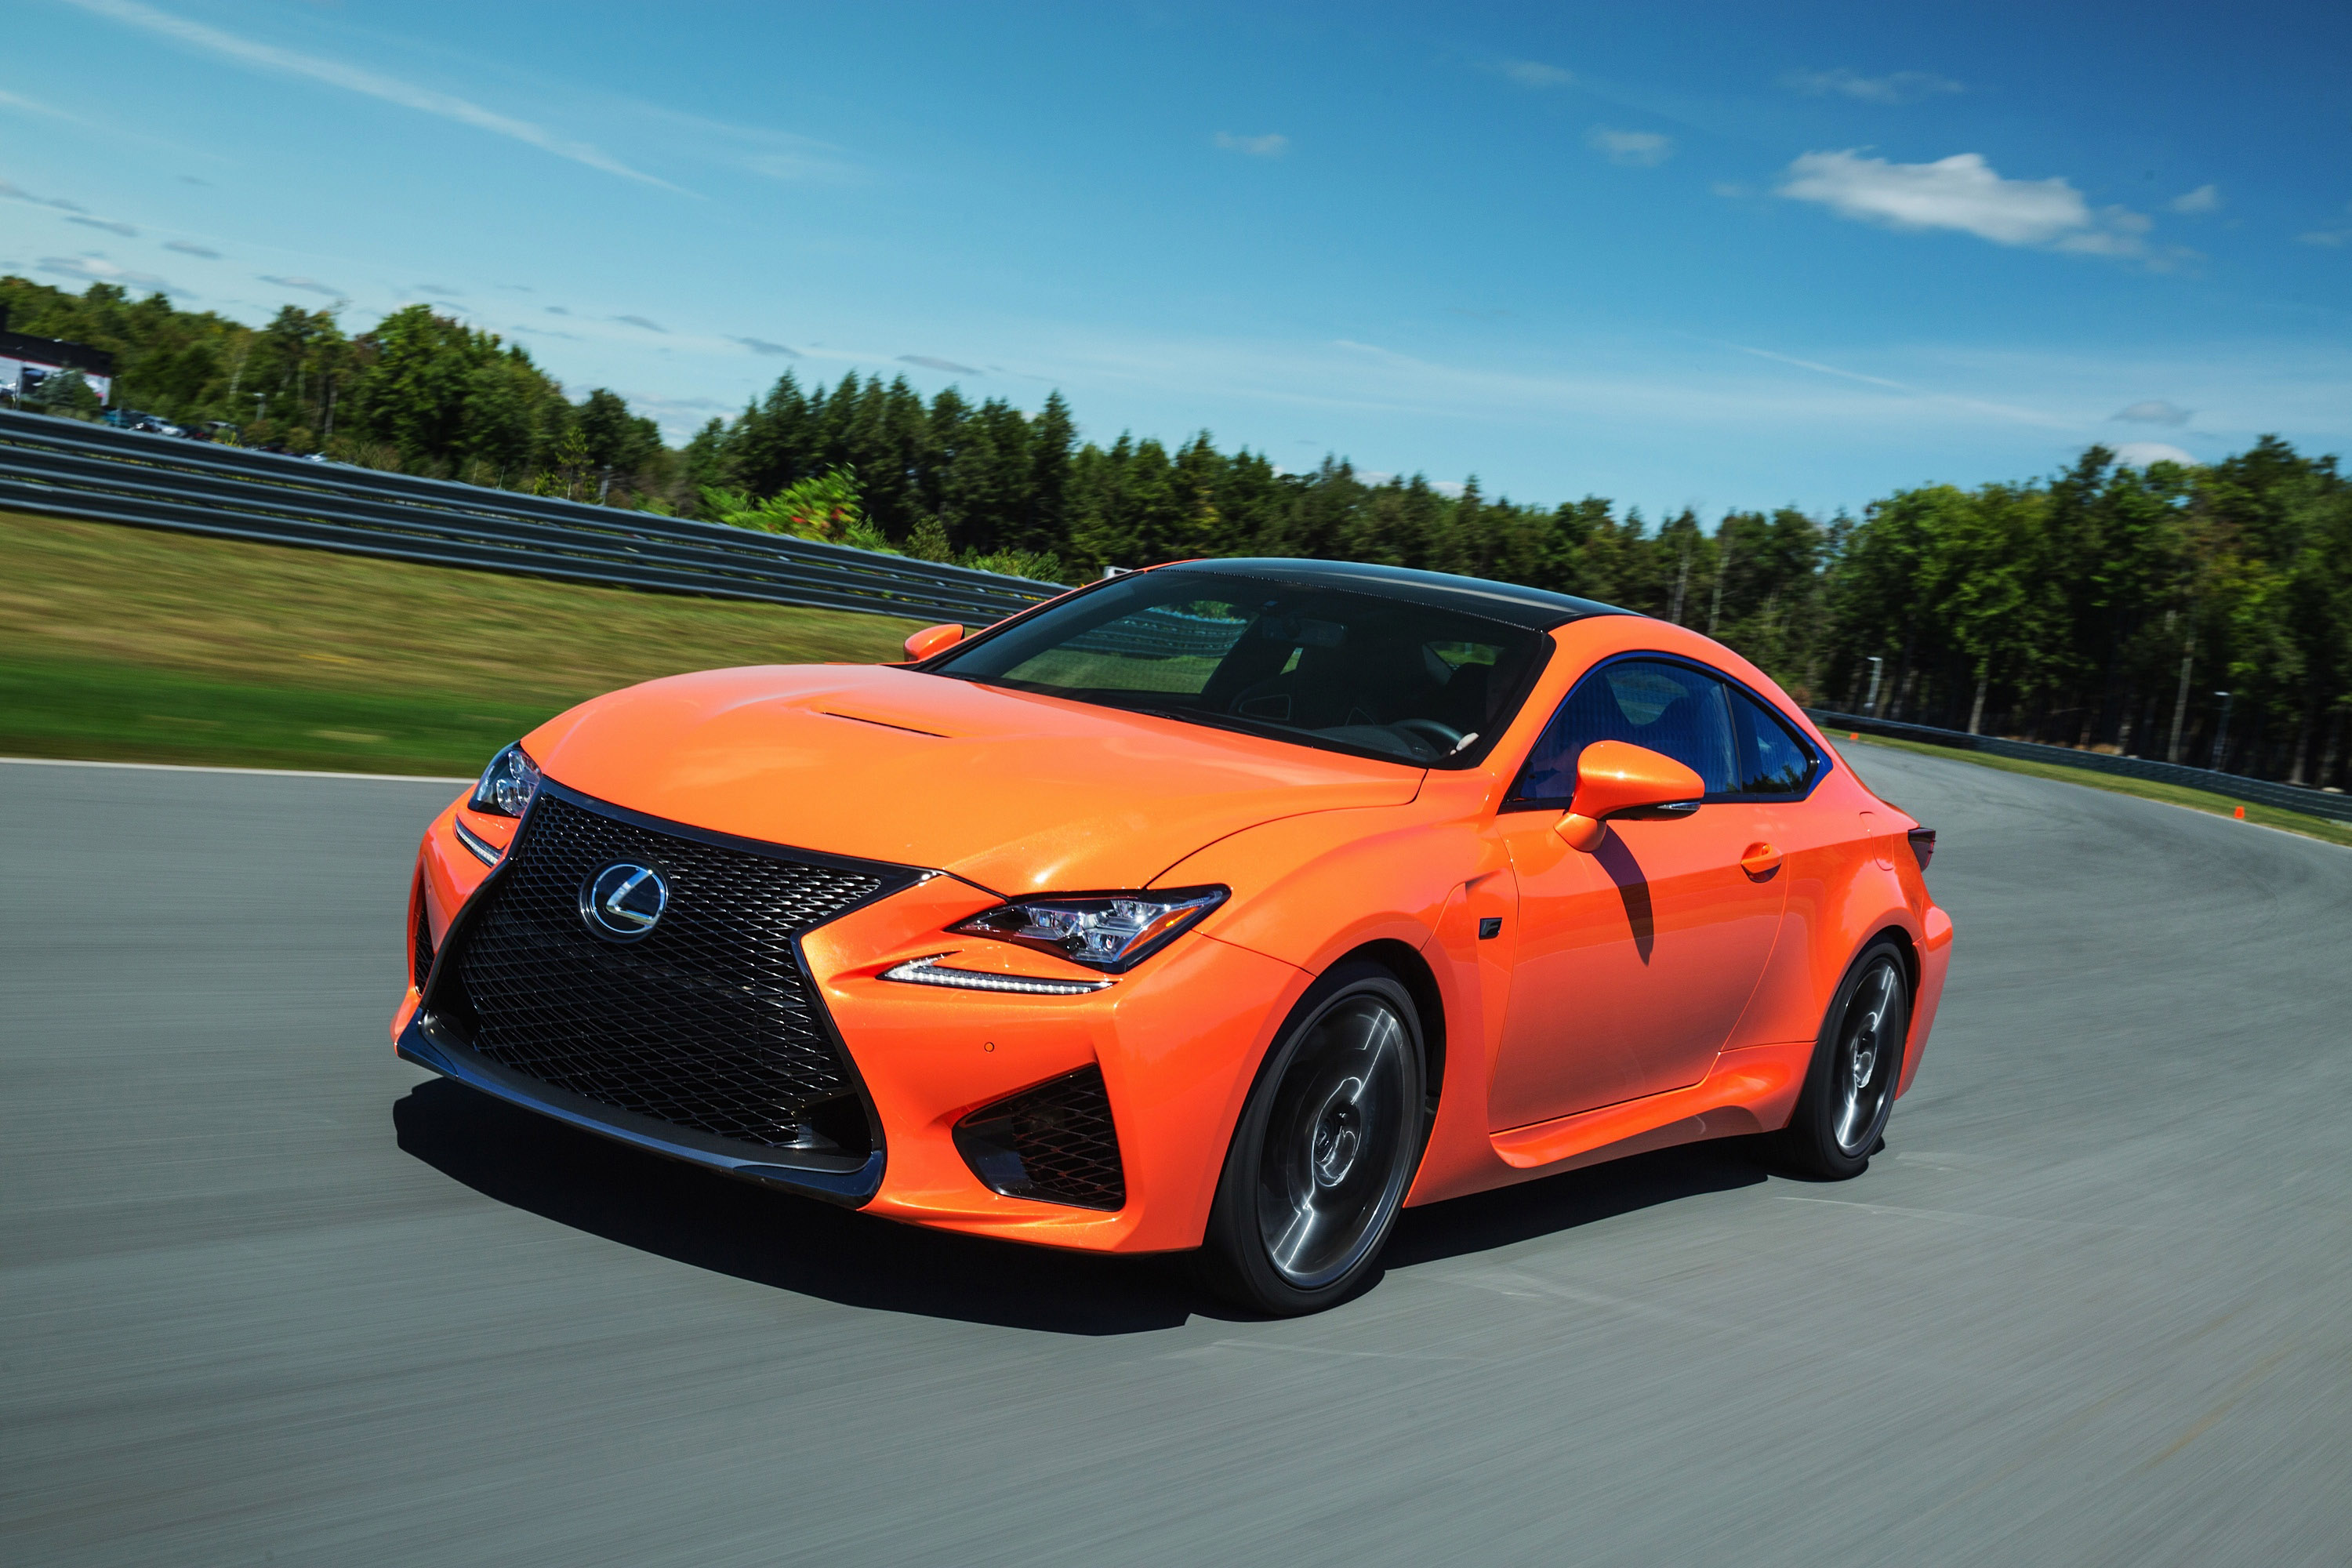 Lexus Updates 2015 RC F With Even More Powerful Engine [VIDEO]